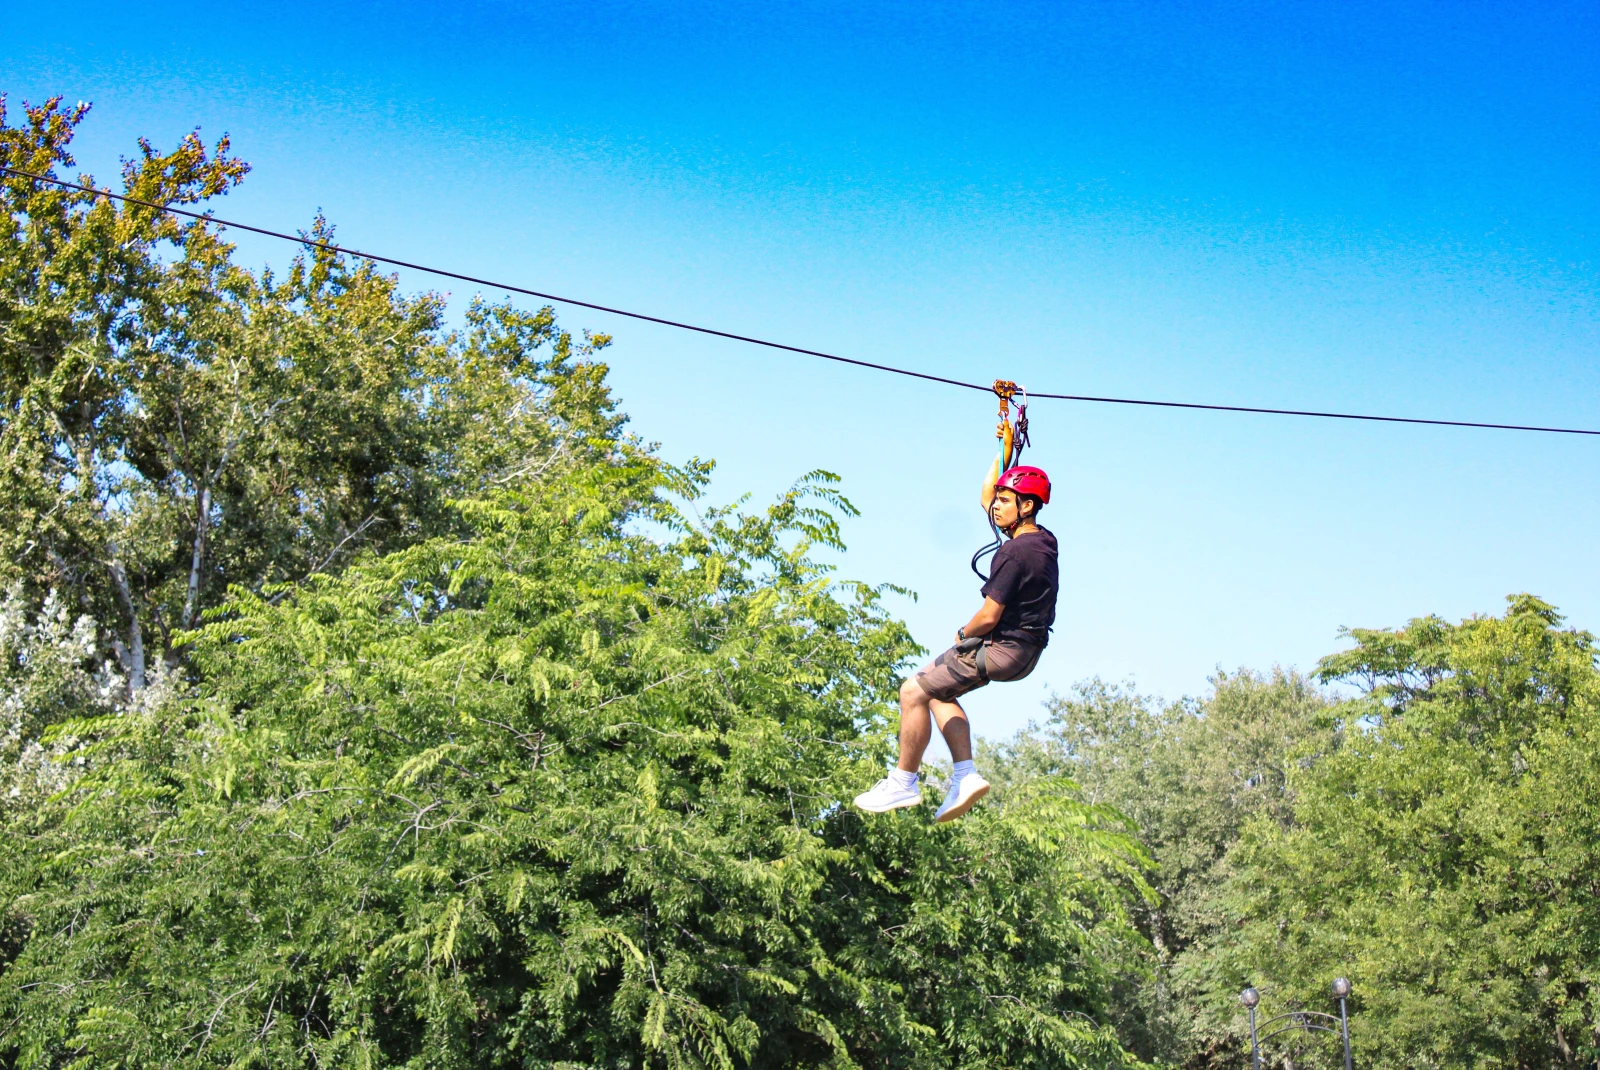 boy hangs on a zip line surrounded by trees during daytime